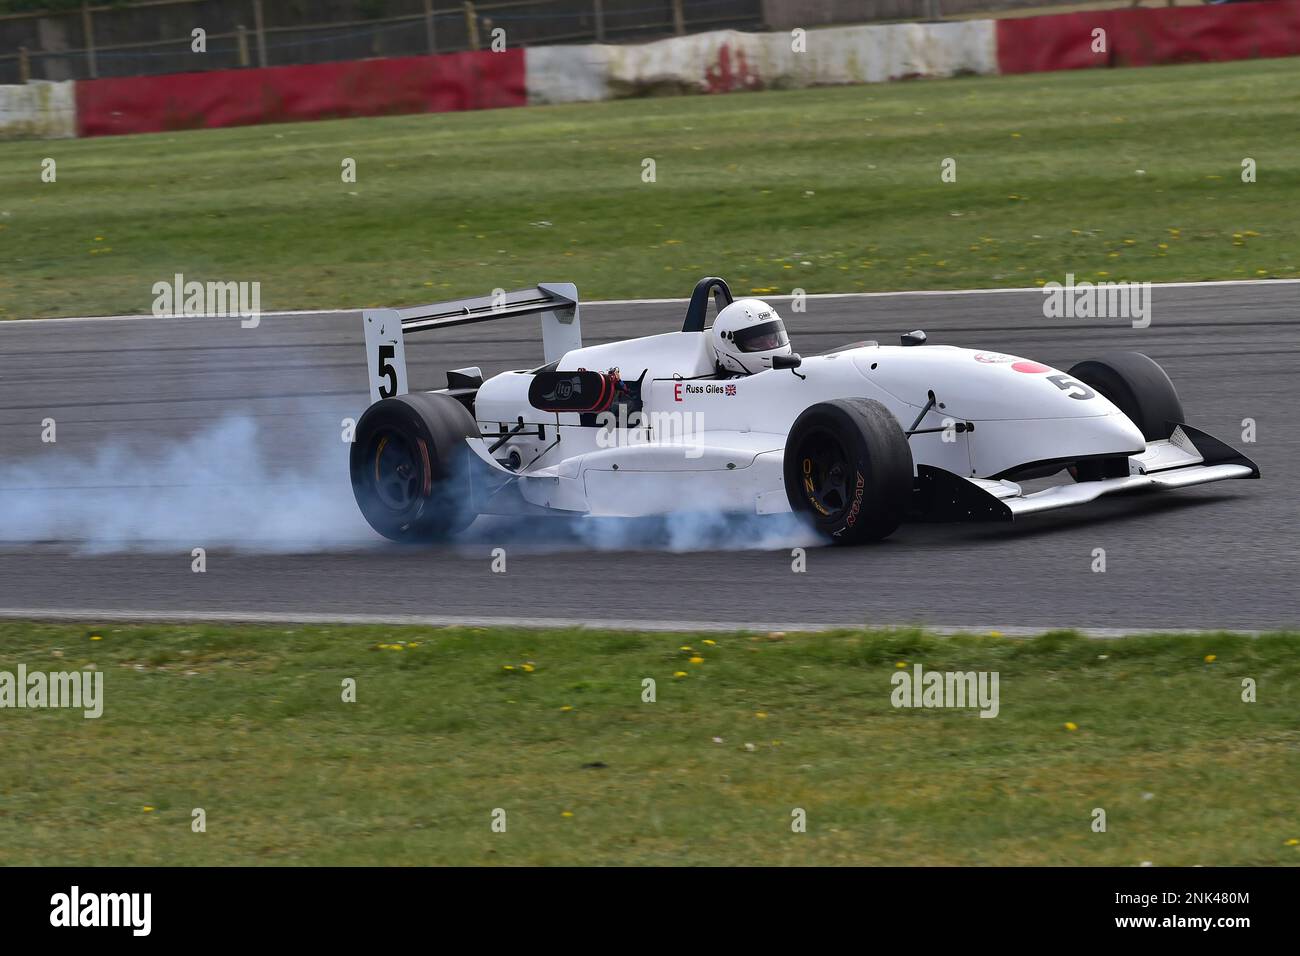 Front wheel lock up and tyre smoke, Russ Giles, Dallara F398, Monoposto Championship Group 1, Monoposto Racing Club, fifteen minutes of racing after a Stock Photo